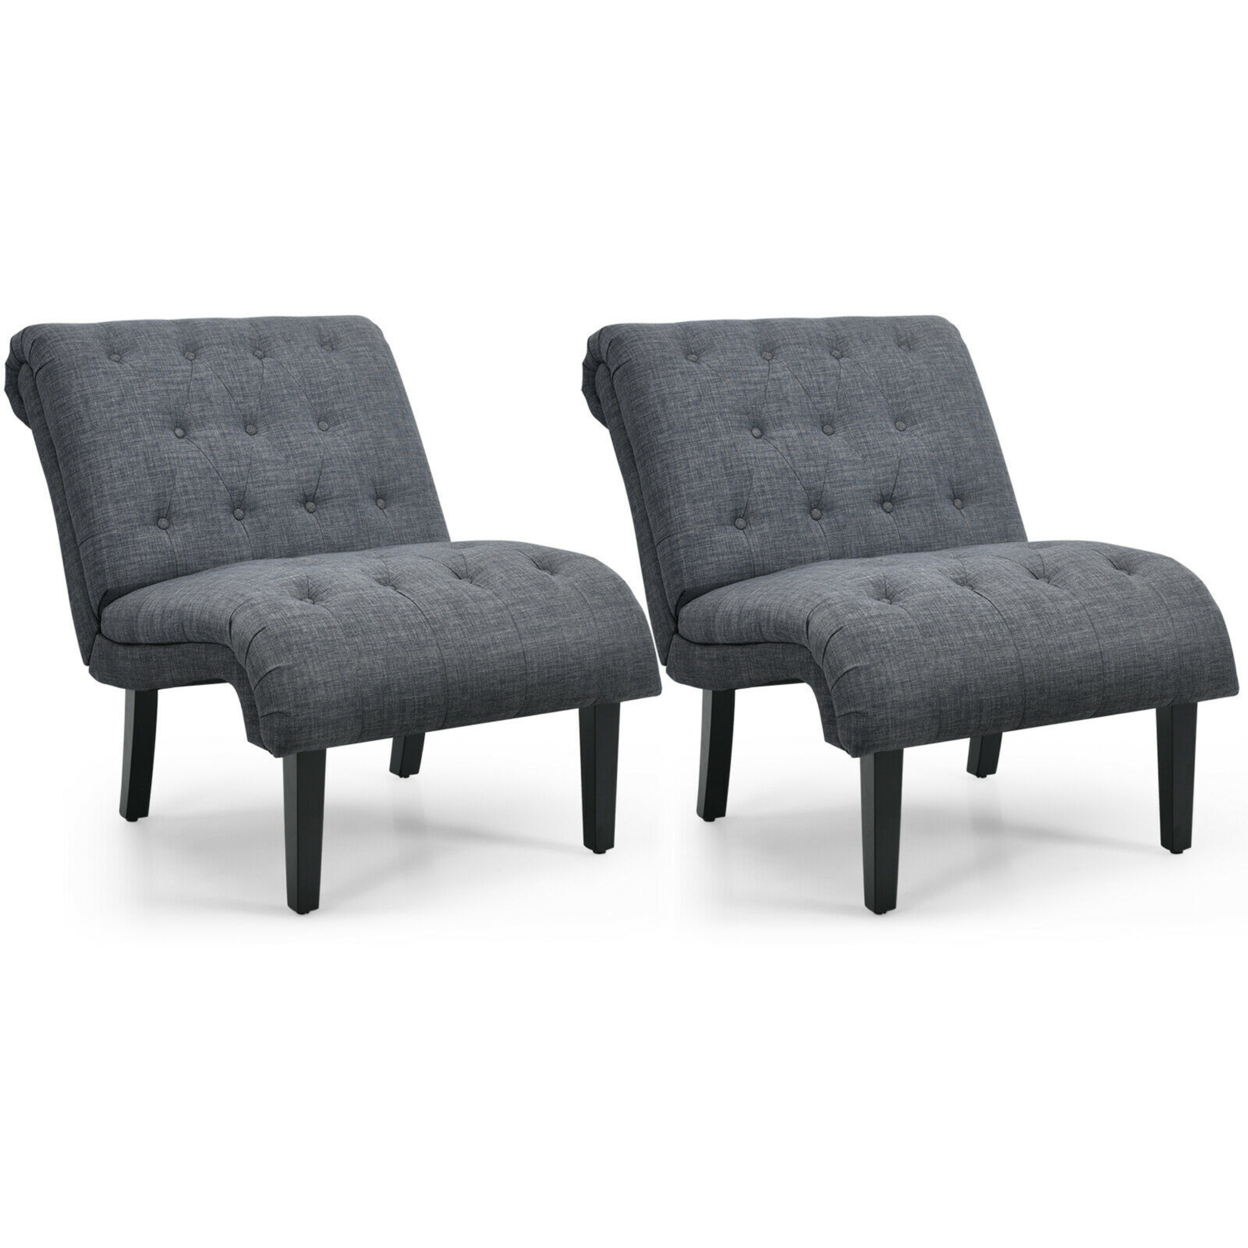 Set Of 2 Armless Accent Chair Upholstered Tufted Lounge Chair - Dark Grey